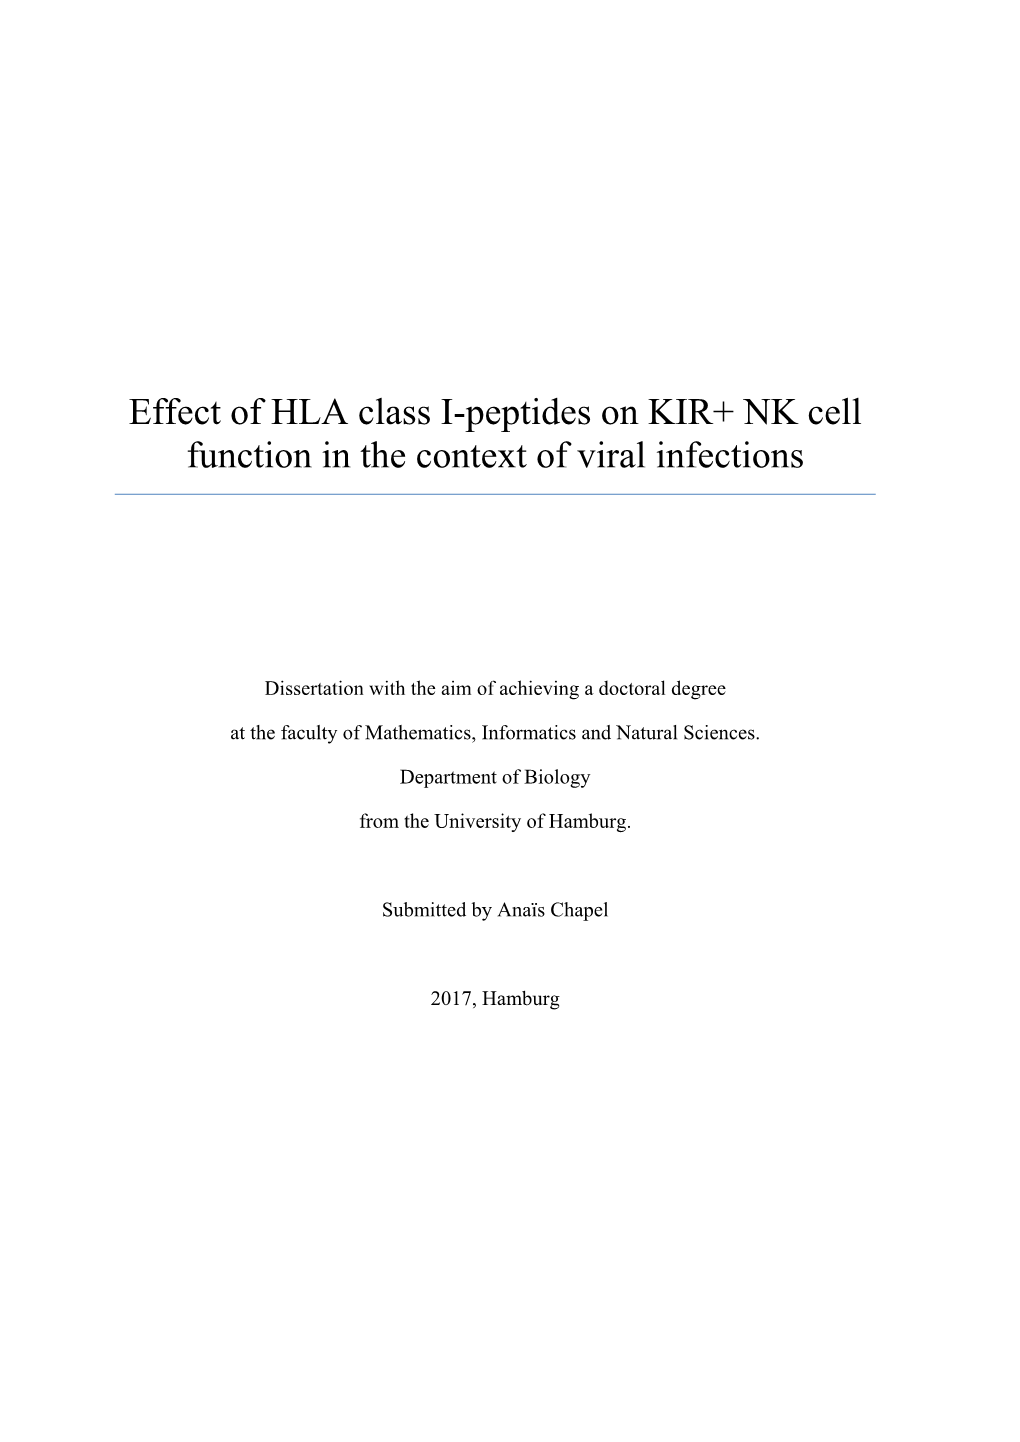 Effect of HLA Class I-Peptides on KIR+ NK Cell Function in the Context of Viral Infections